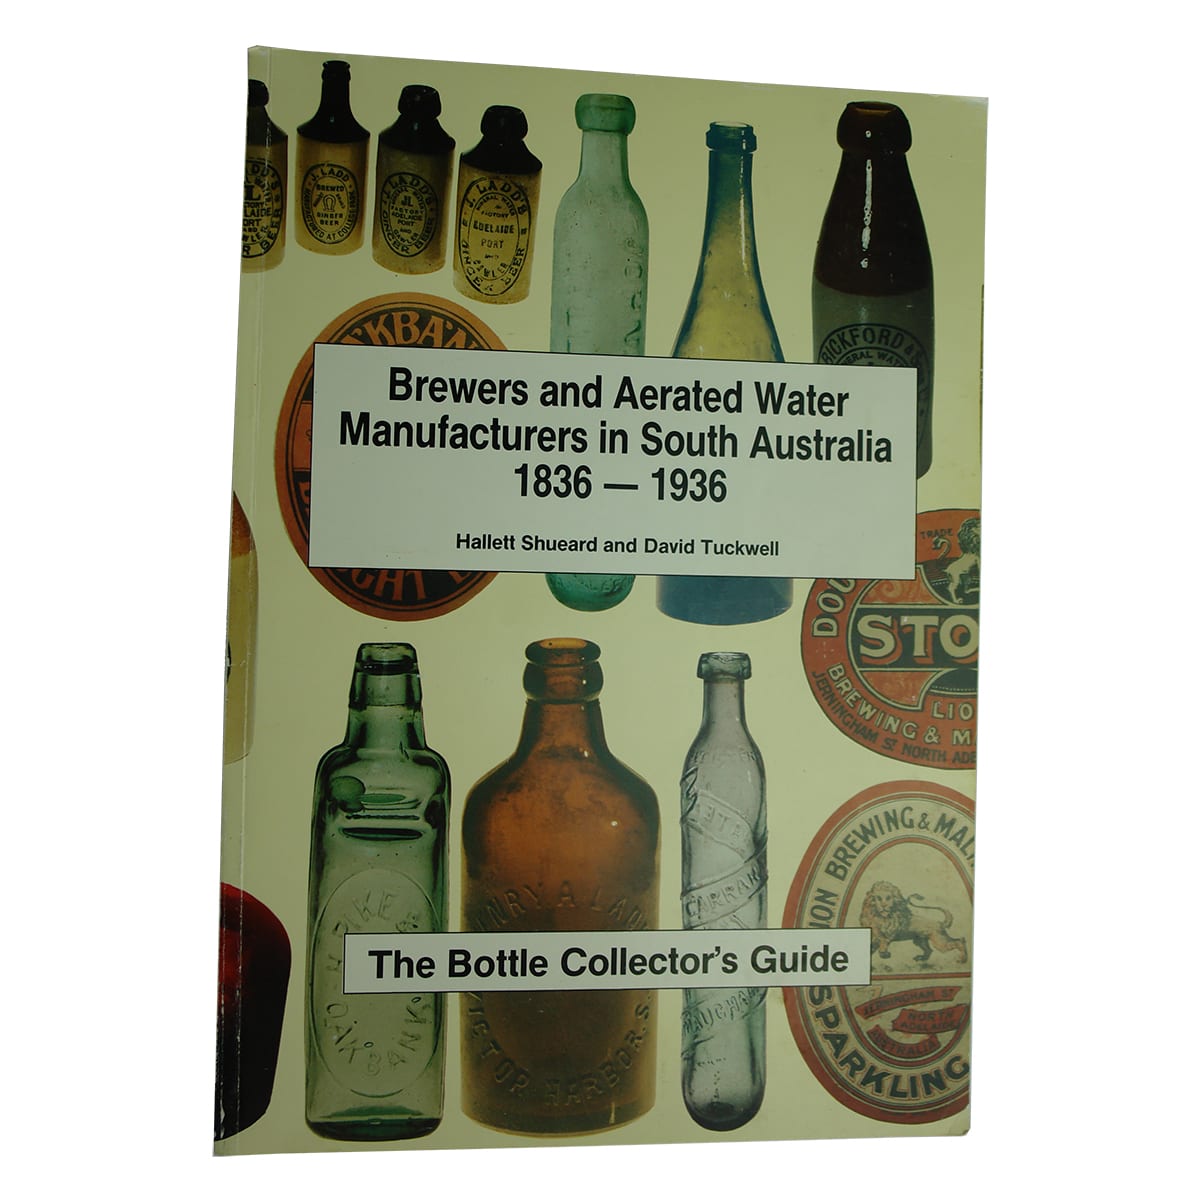 Book. Brewers and Aerated Water Manufacturers in South Australia